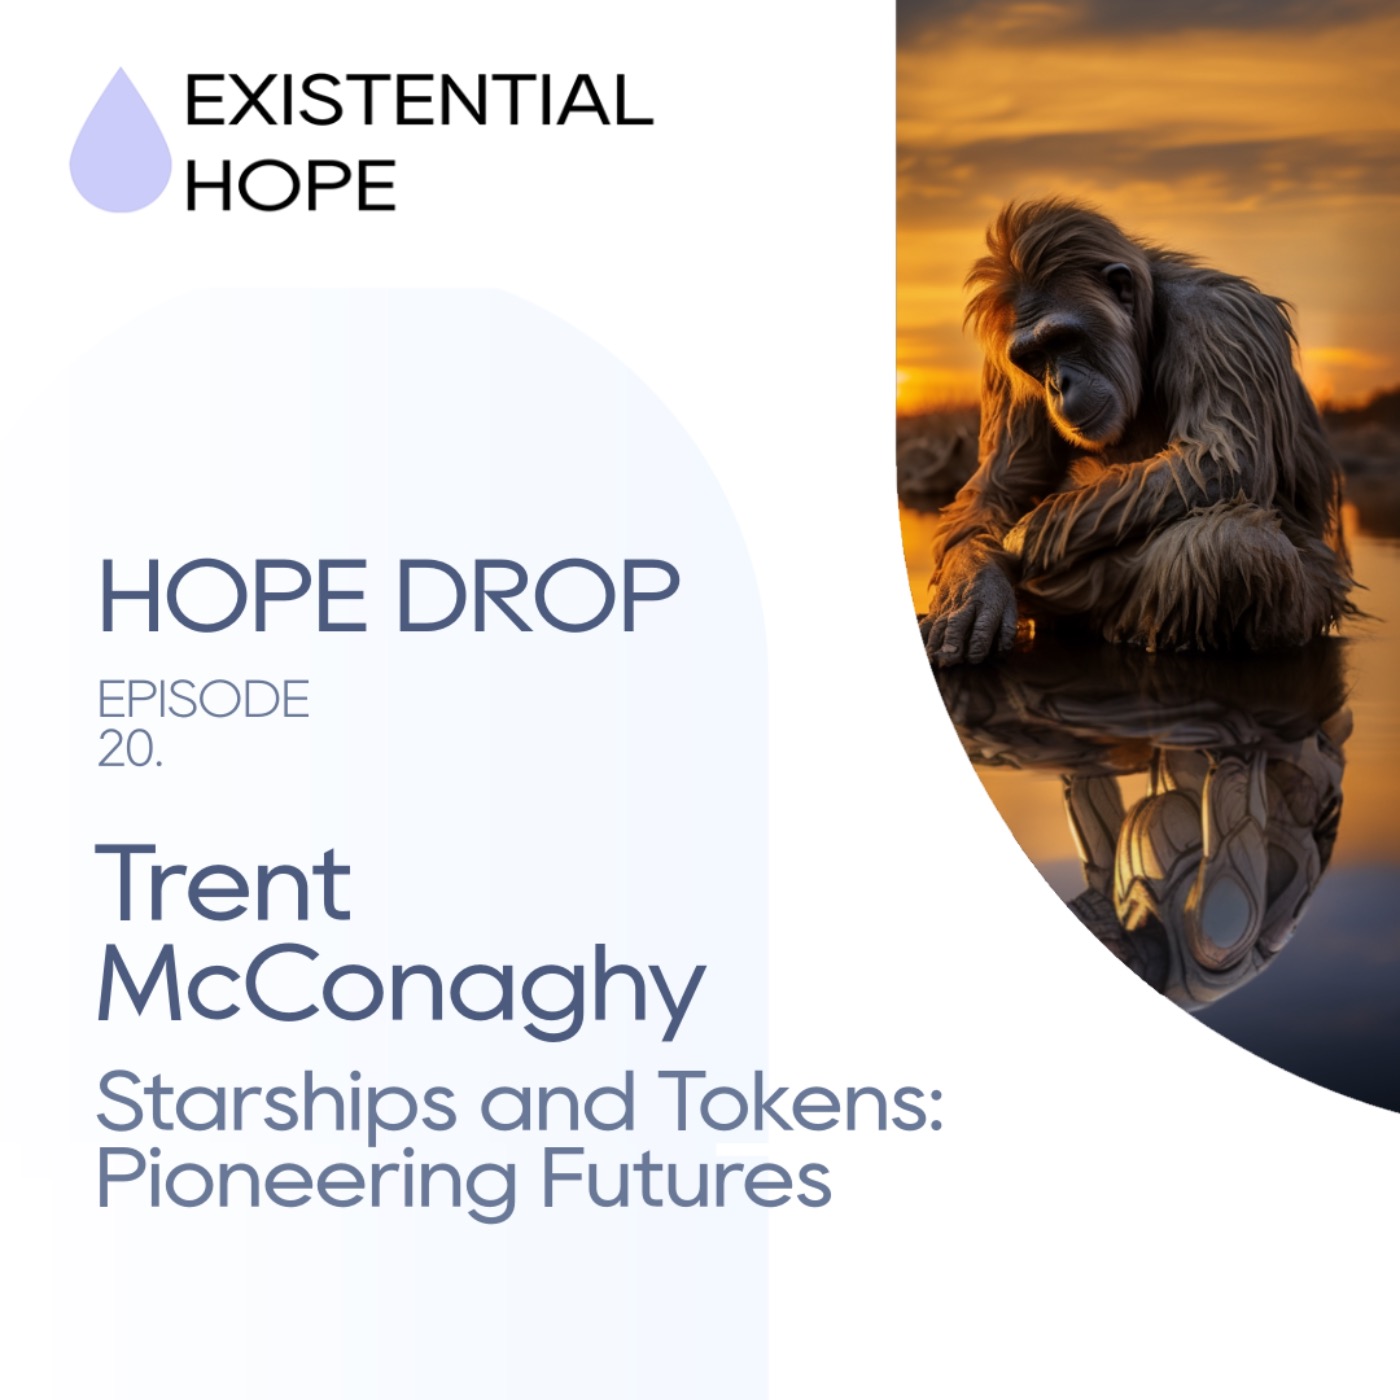 Existential Hope Podcast: Trent McConaghy | From Starships to Tokens: Pioneering Futures